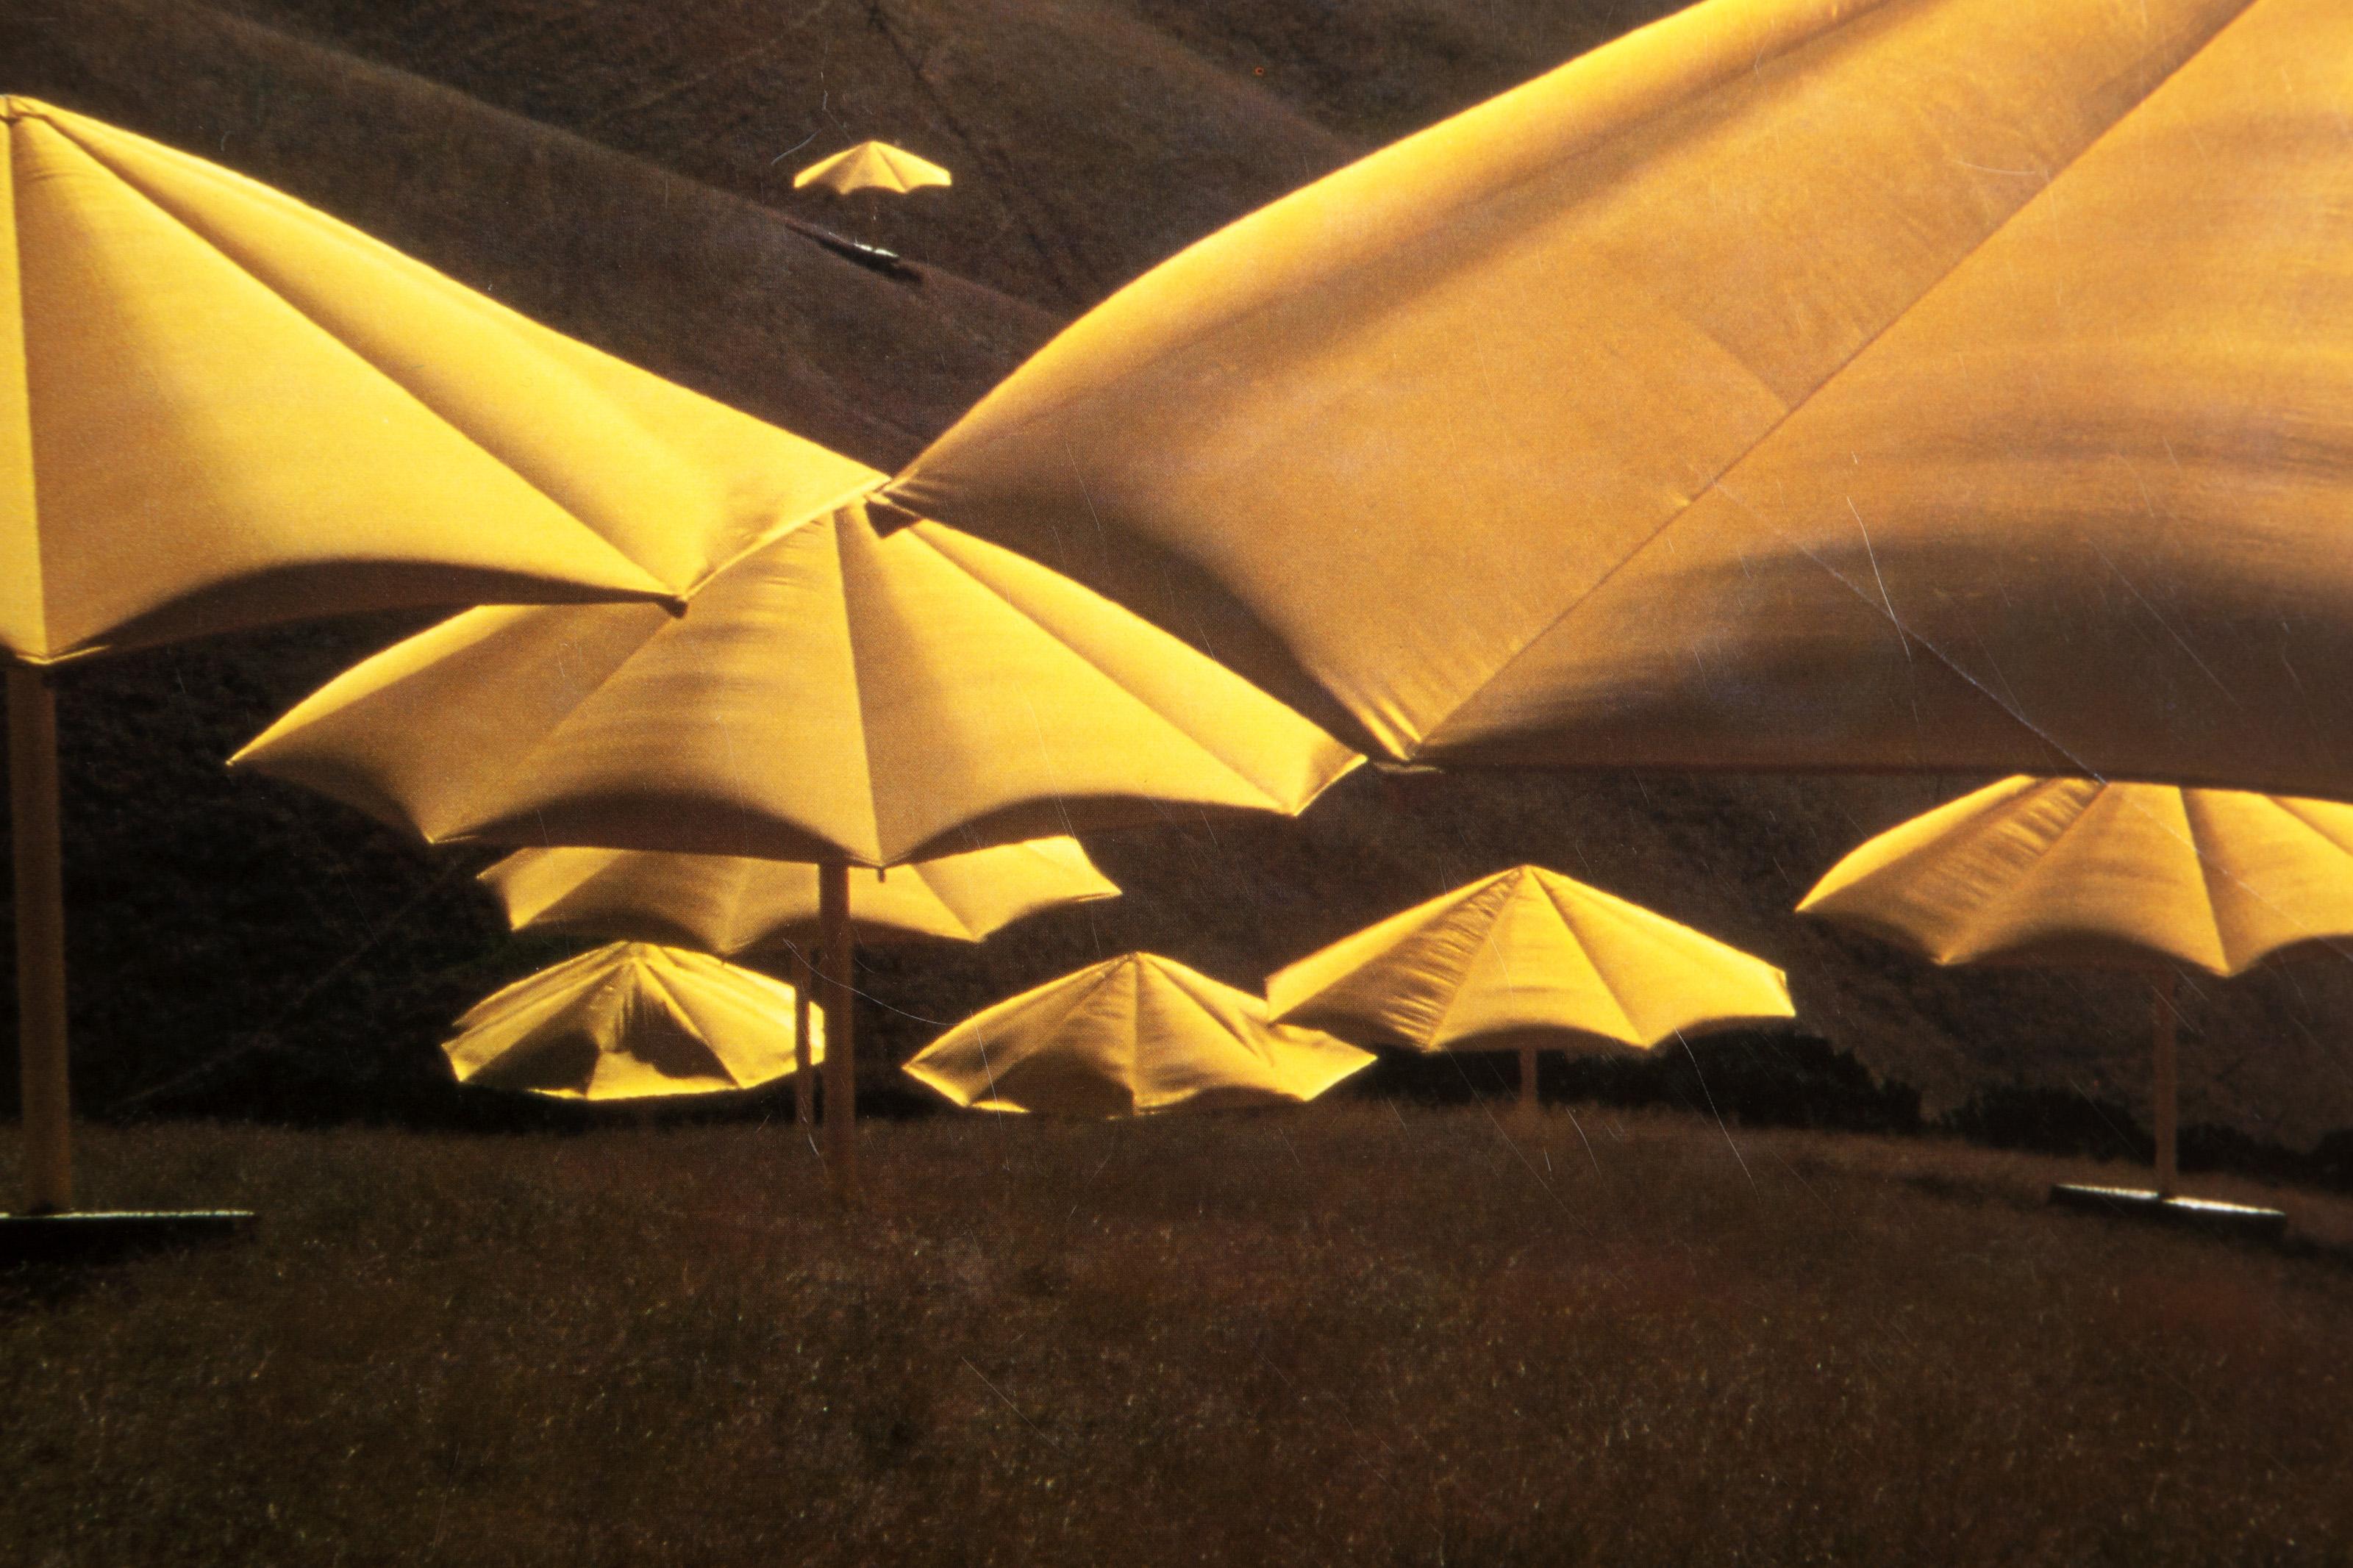 The Umbrellas, Poster, signed in marker by Christo and Jeanne-Claude For Sale 1